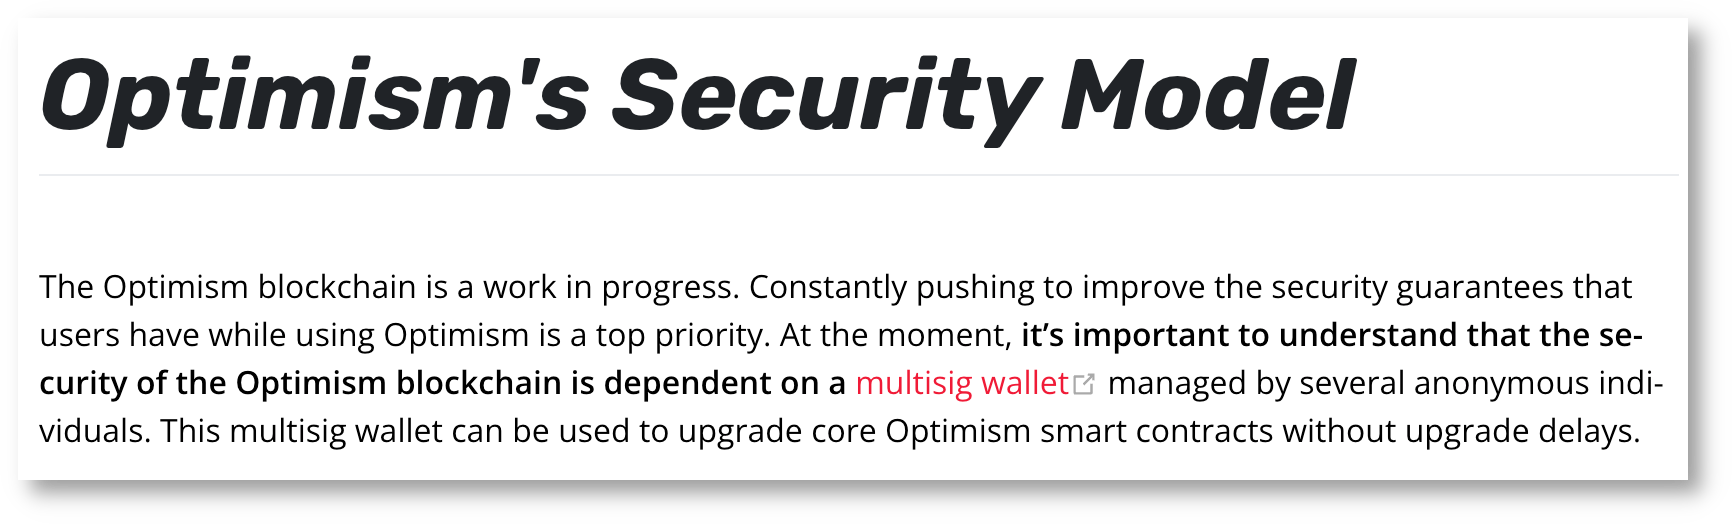 Optimism's Security Model The Optimism blockchain is a work in progress. Constantly pushing to improve the security guarantees that users have while using Optimism is a top priority. At the moment, it's important to understand that the security of the Optimism blockchain is dependent on a multisig wallet (opens new window)managed by several anonymous individuals. This multisig wallet can be used to upgrade core Optimism smart contracts without upgrade delays.